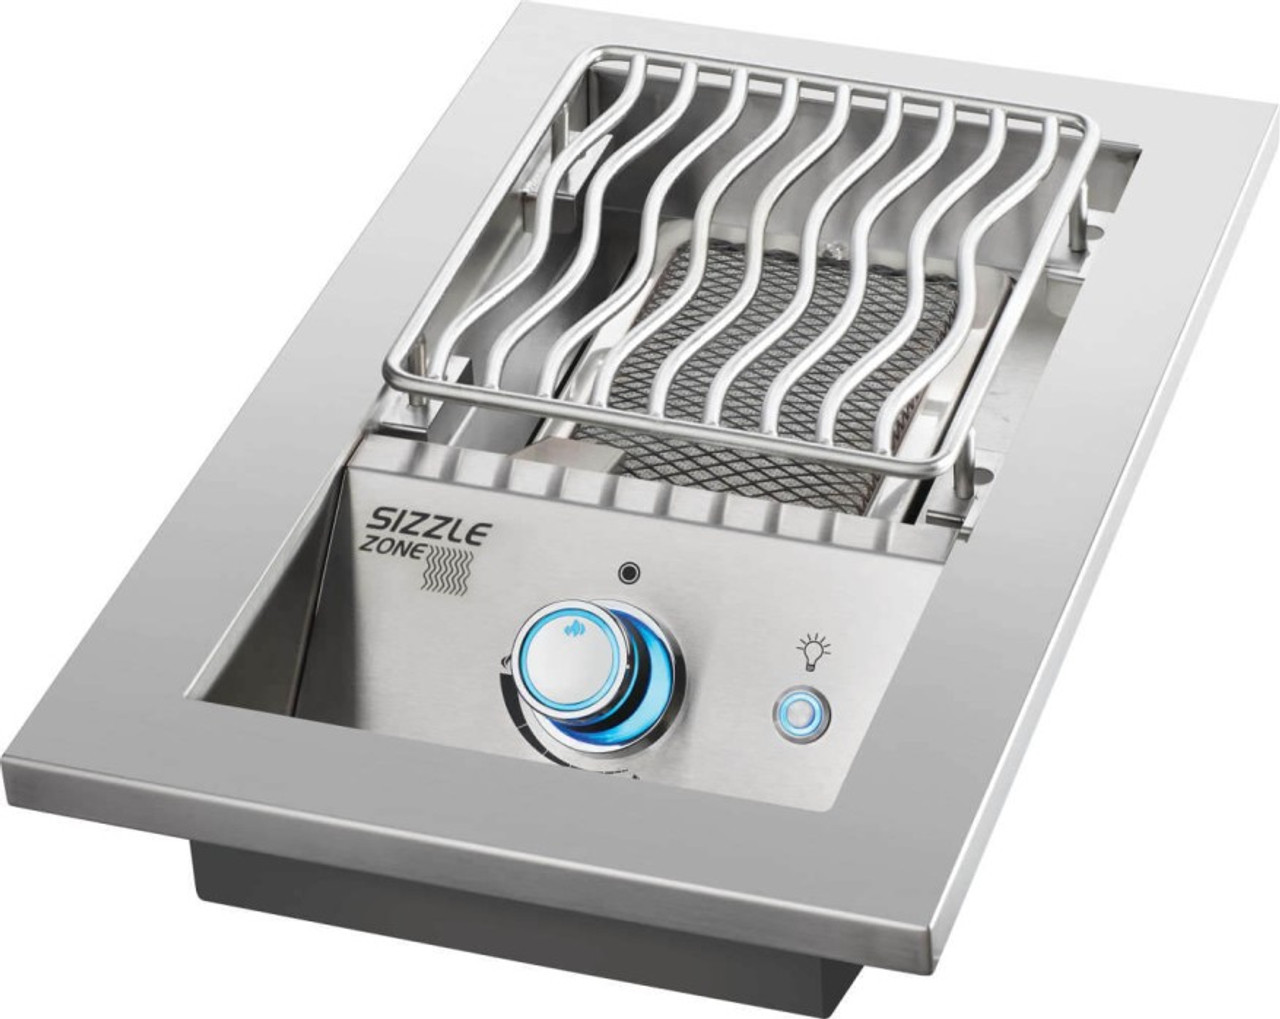 BIB10IRNSSAU - Built-In 700 Series Single Infrared Burner with Stainless Steel Cover - Stainless Steel